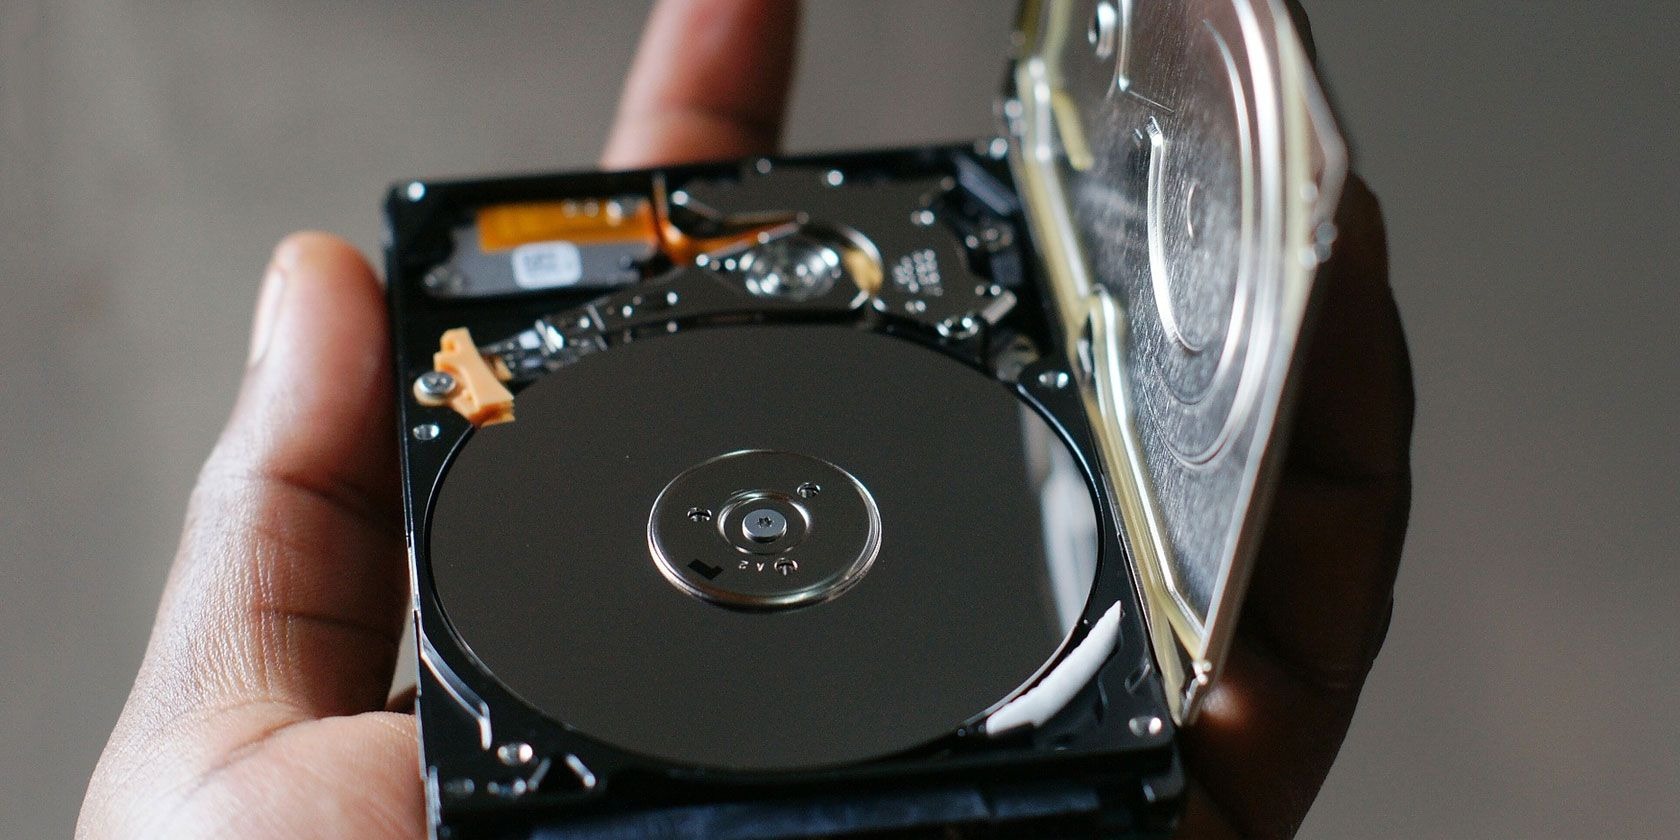 How To Wipe A Hard Drive On A Dead Computer